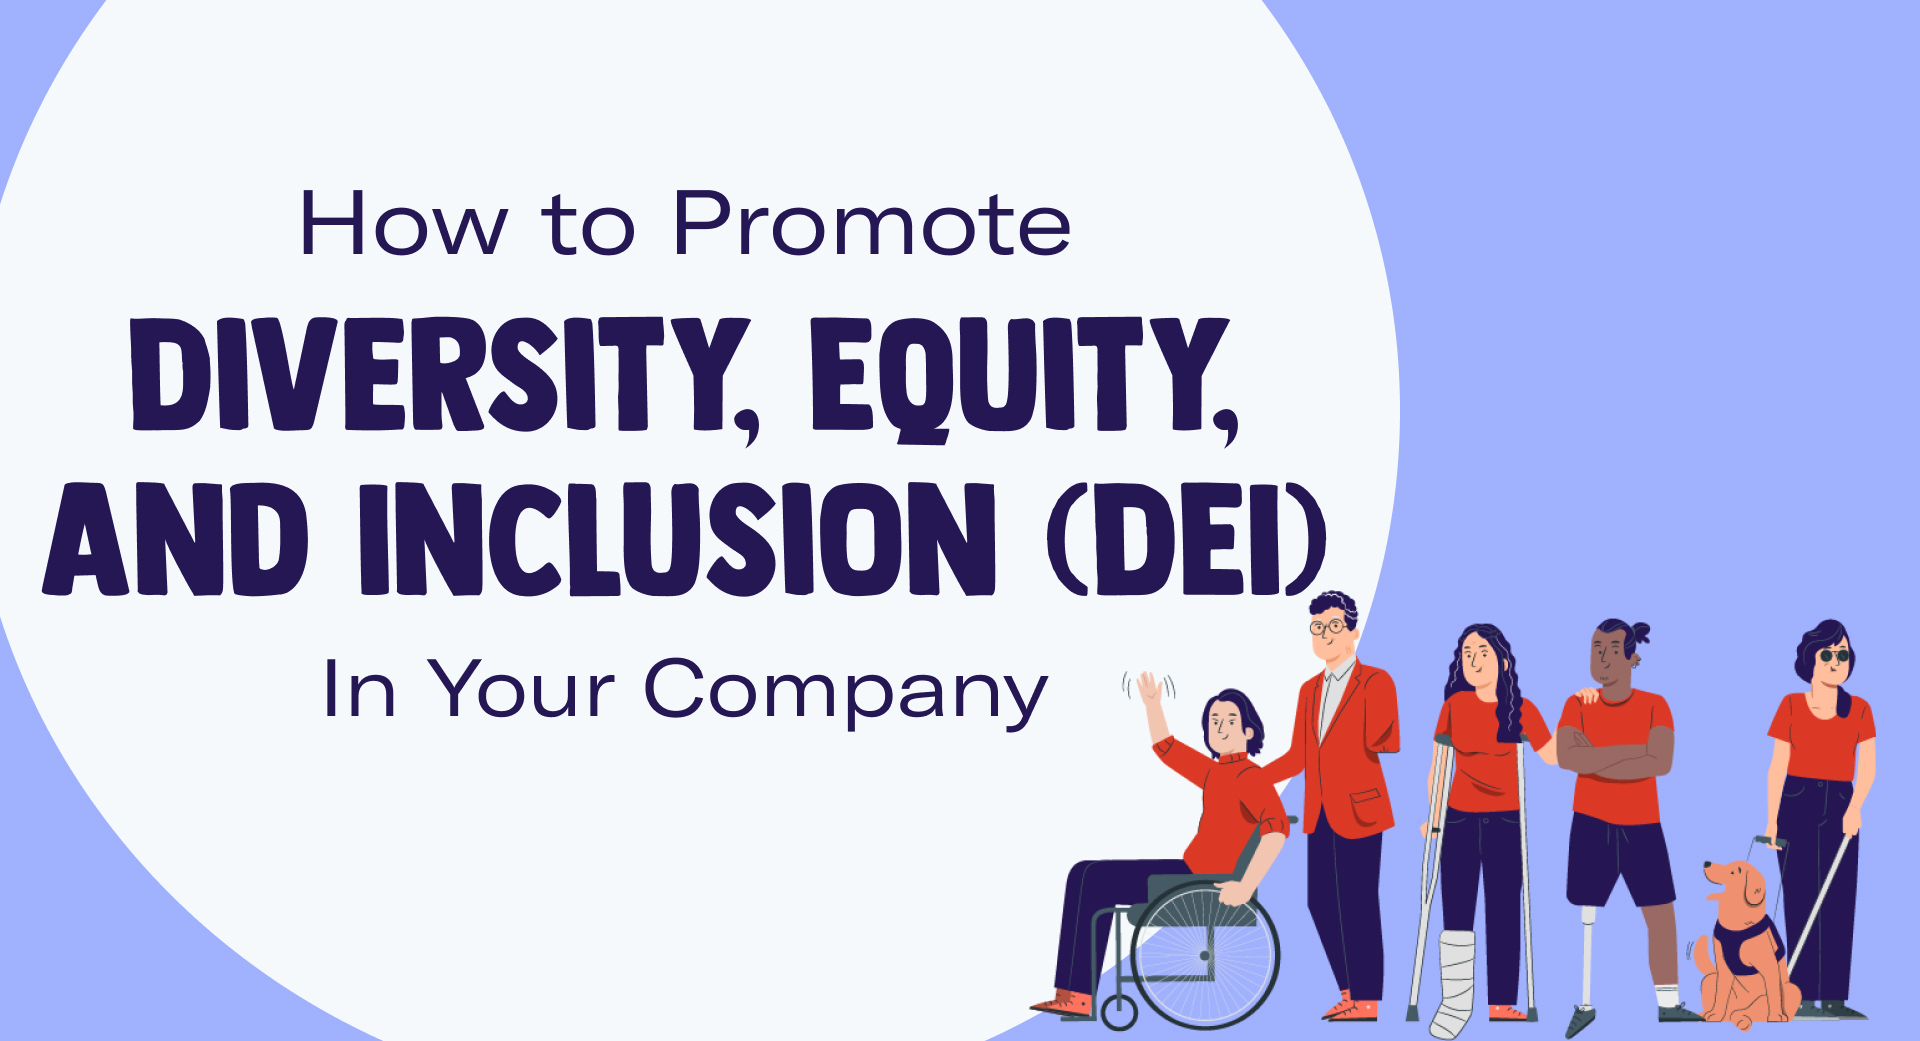 How to Promote Diversity, Equity, and Inclusion (DEI) in Your Company?